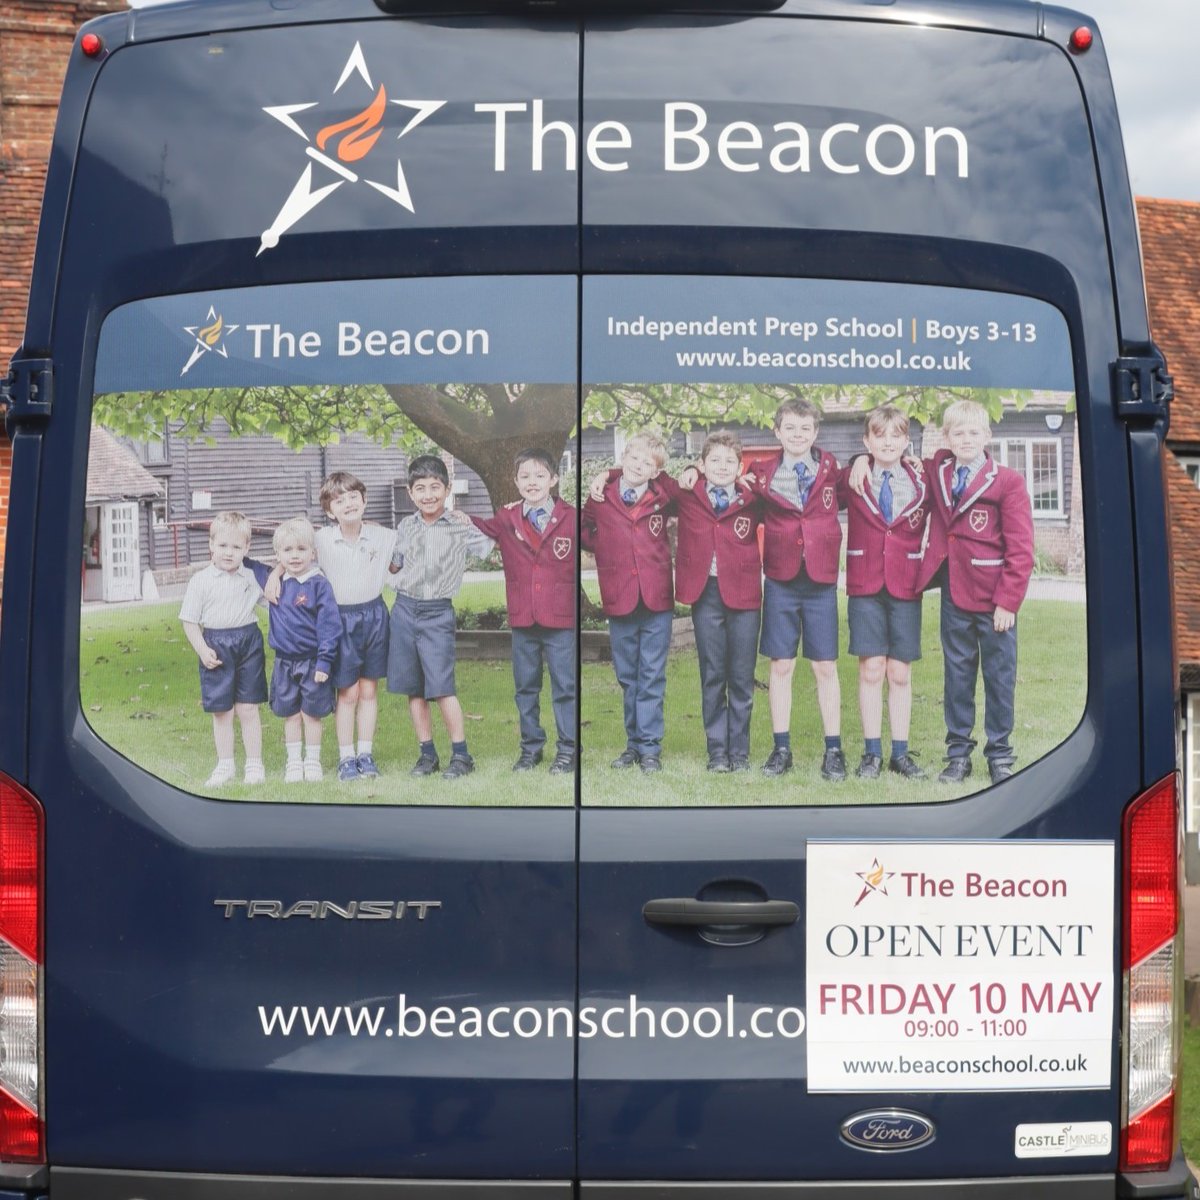 🚌Have you seen our new #minibus graphics? We love this image of Beacon boys from #Nursery to #Year 8 together.
📍We run an extensive #bus & under 6 #car service for pupils. Routes include #HighWycombe #Beaconsfield #Chorleywood #GerrardsCross #Chalfonts & villages.
#BeConnected